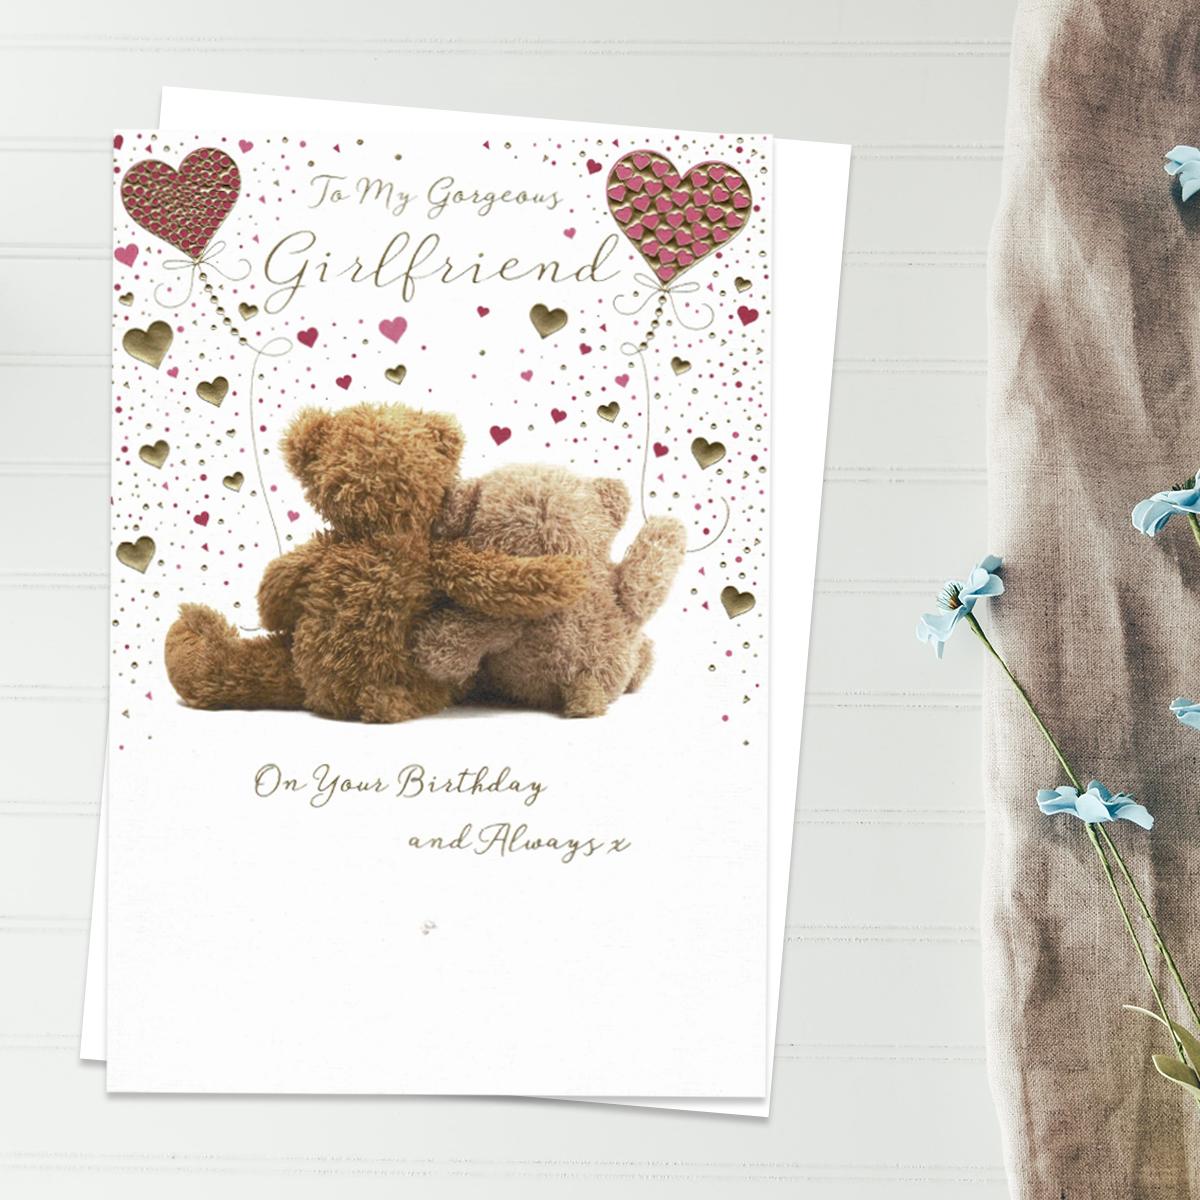 To My Gorgeous Girlfriend On Your Birthday And Always Featuring two Teddies Holding Balloons. With Added Gold Foil Detail And White Envelope